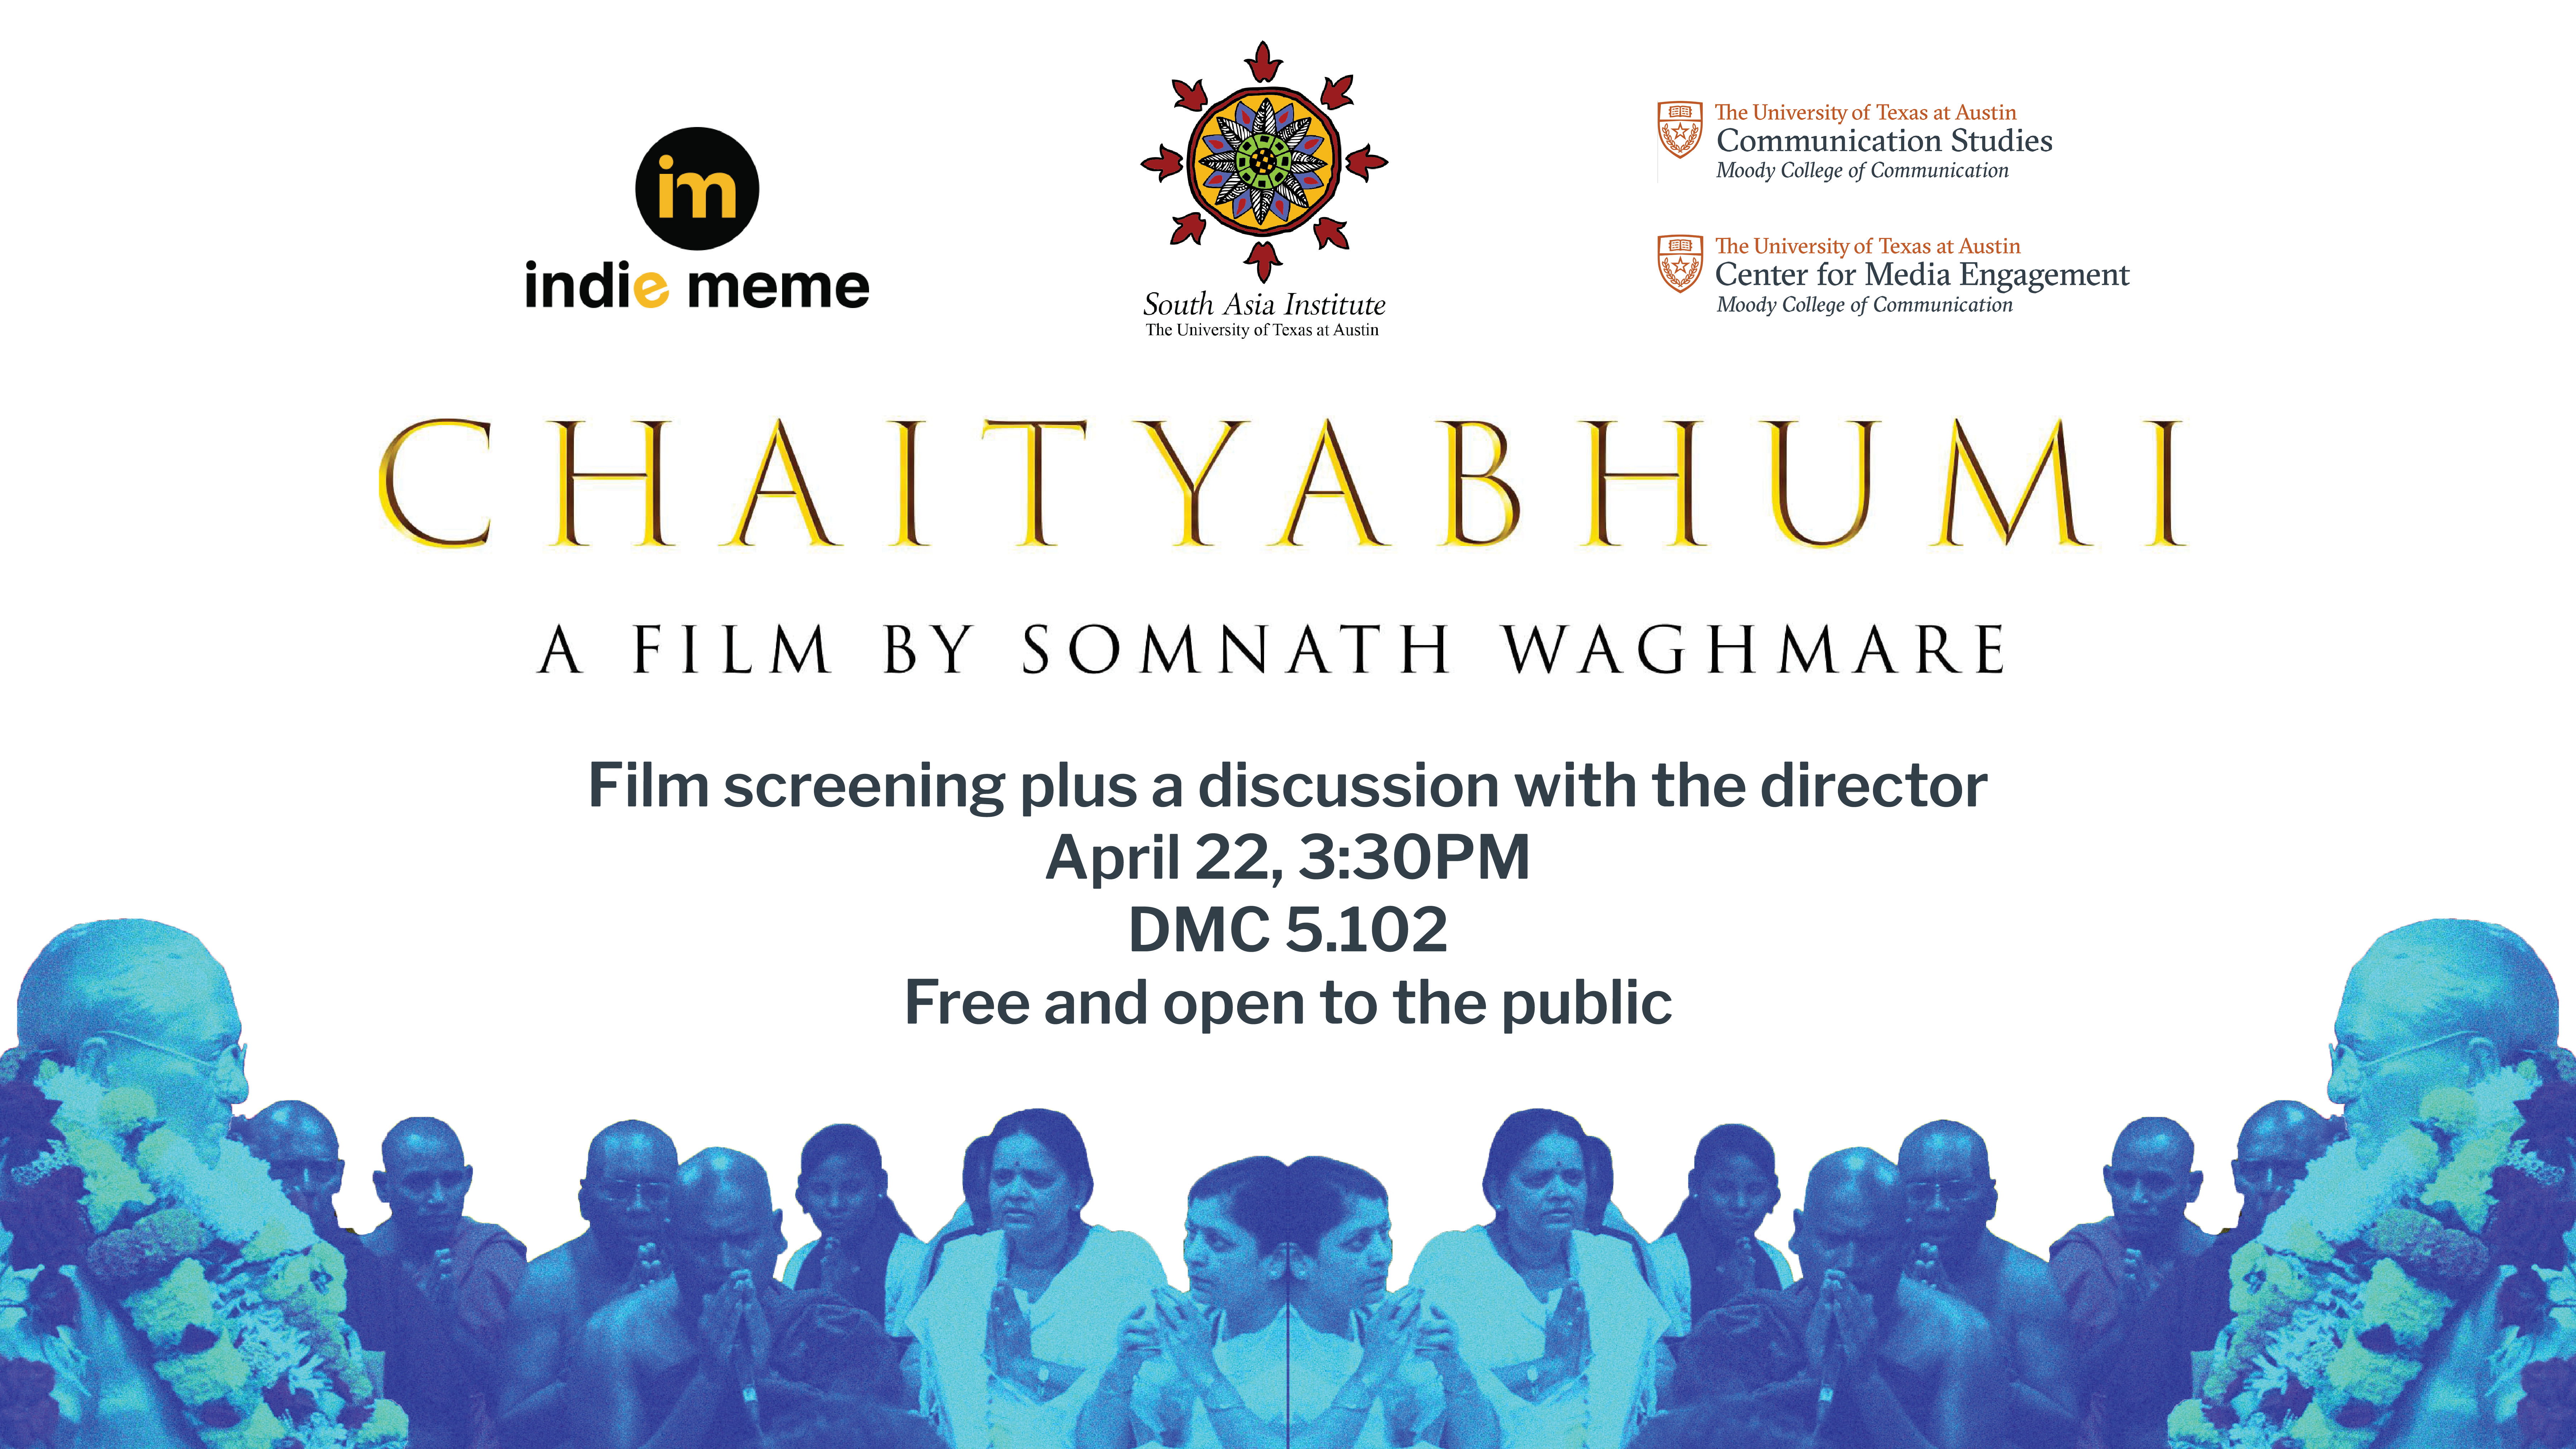 Film screening plus a discussion with the director April 22, 3:30PM DMC 5.102 Free and open to the public